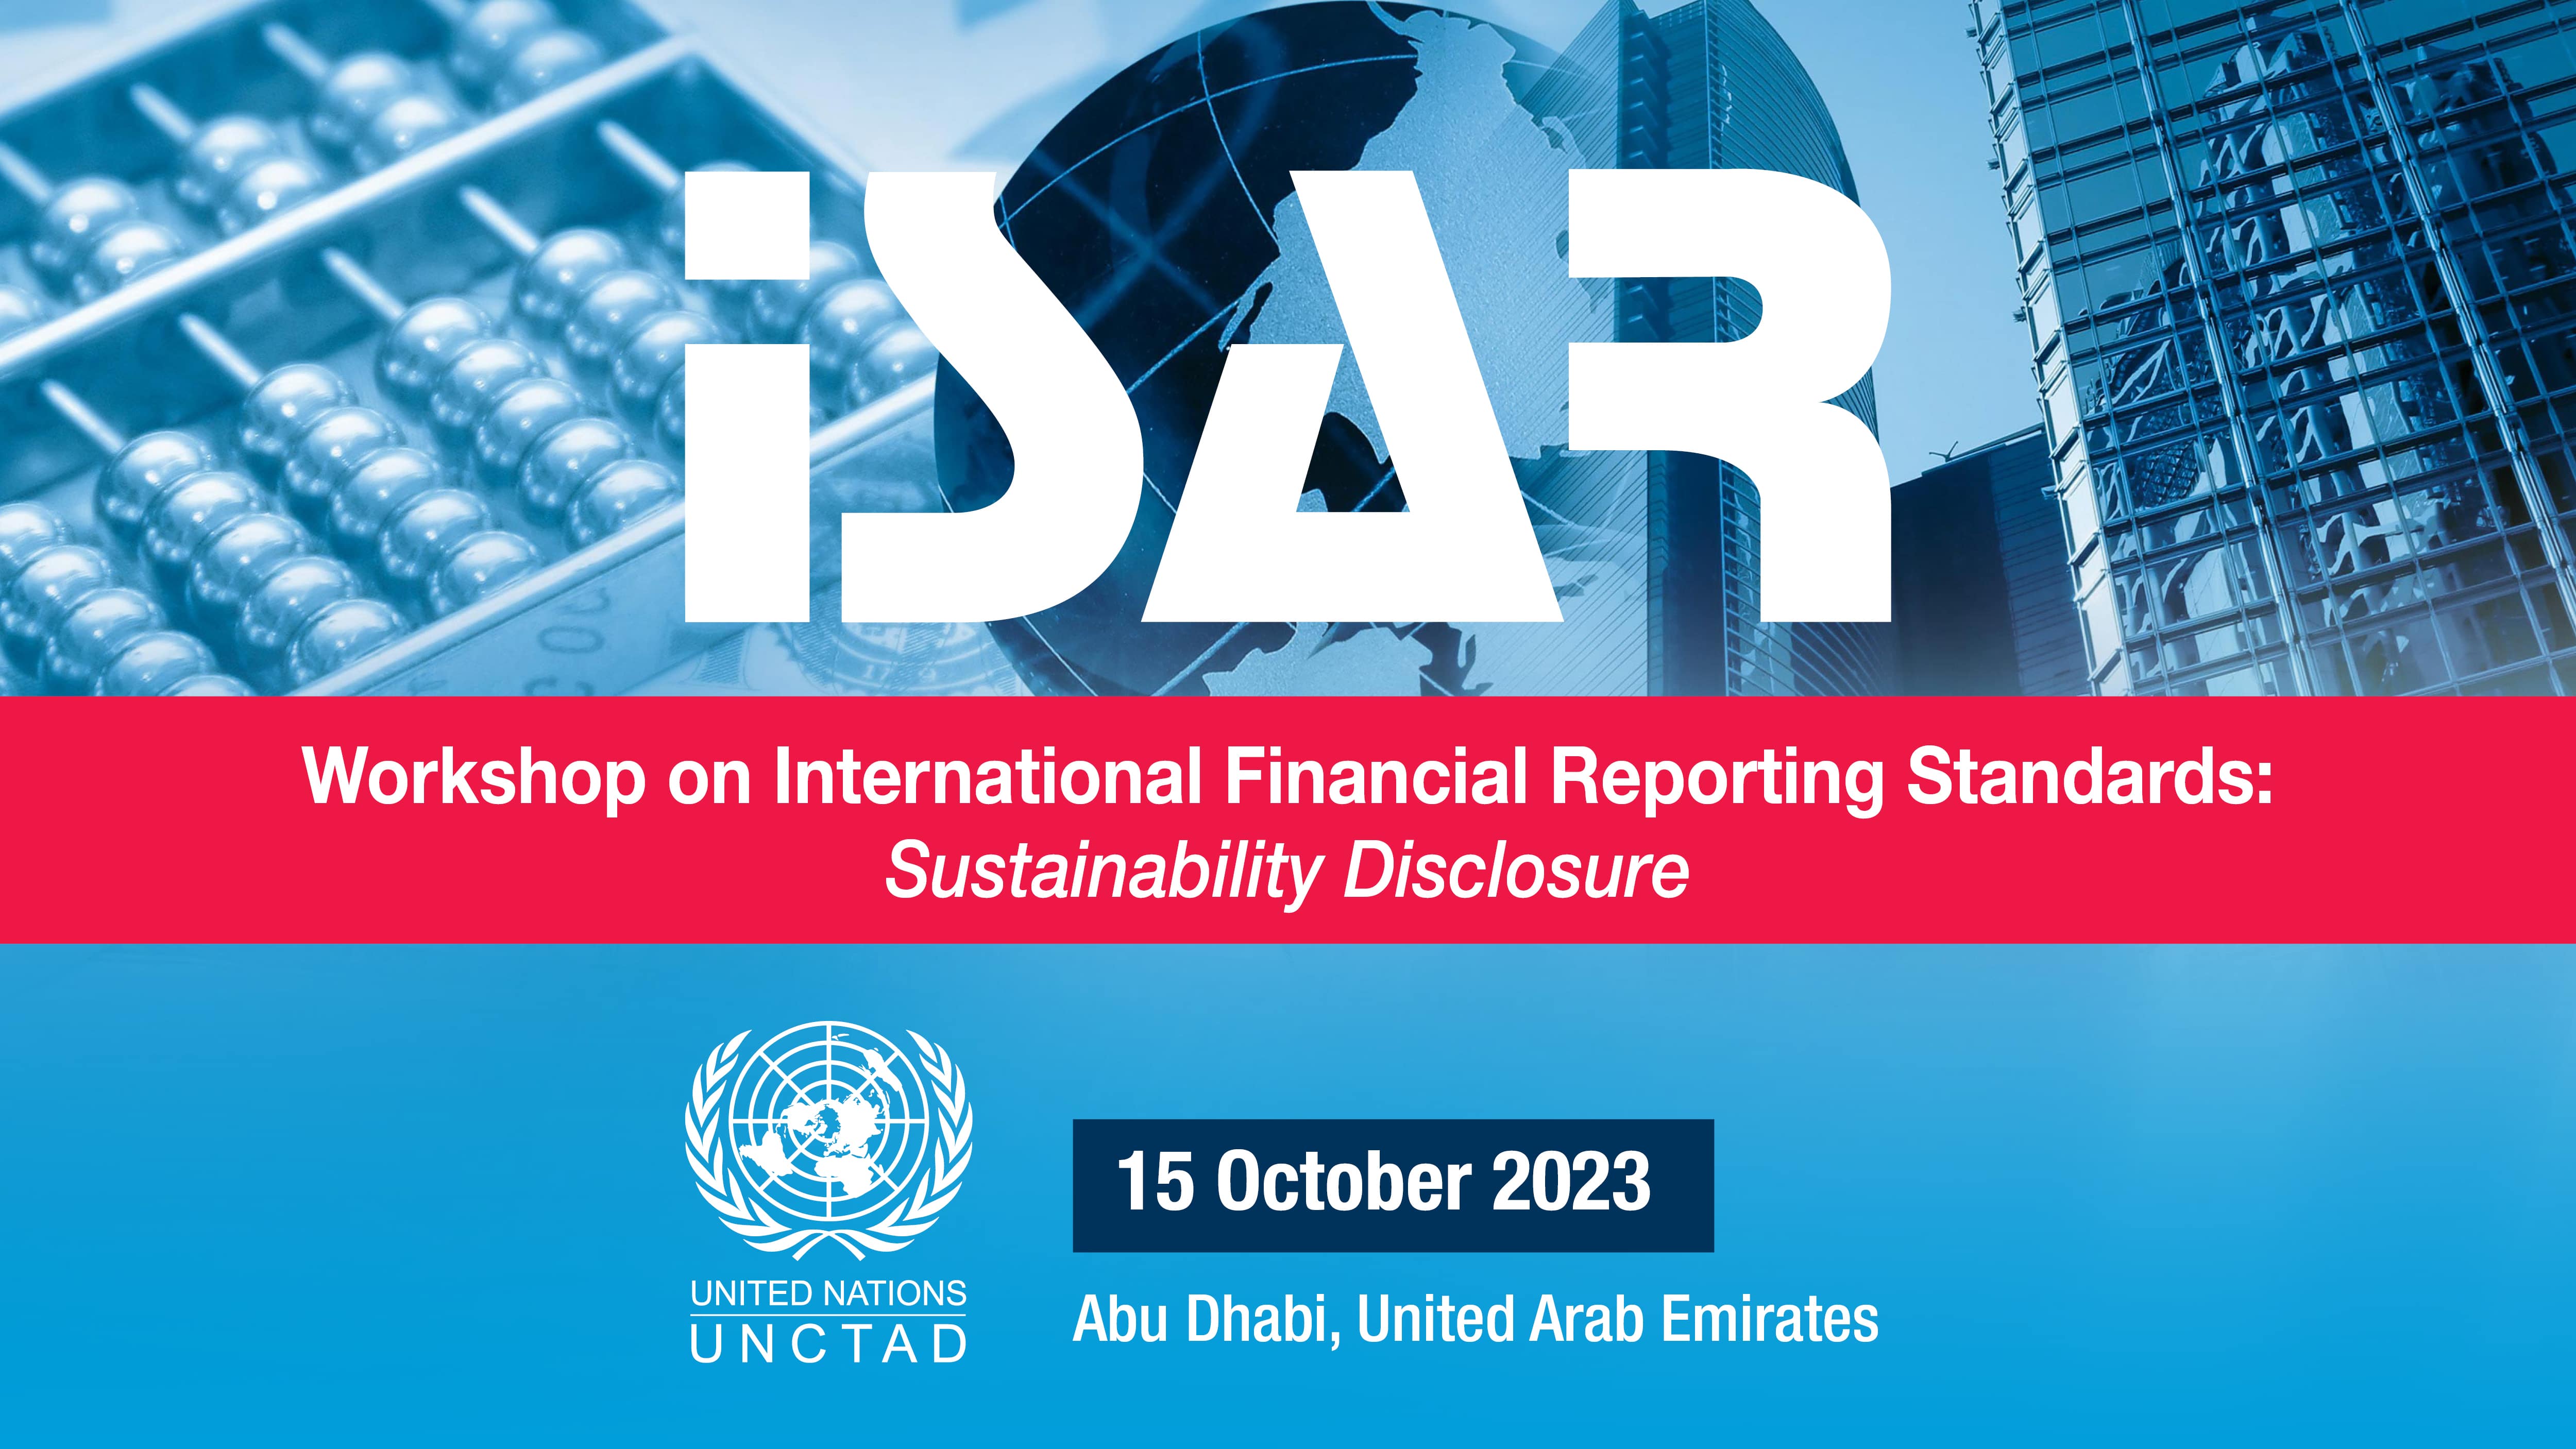 Workshop on International Financial Reporting Standards: Sustainability Disclosure